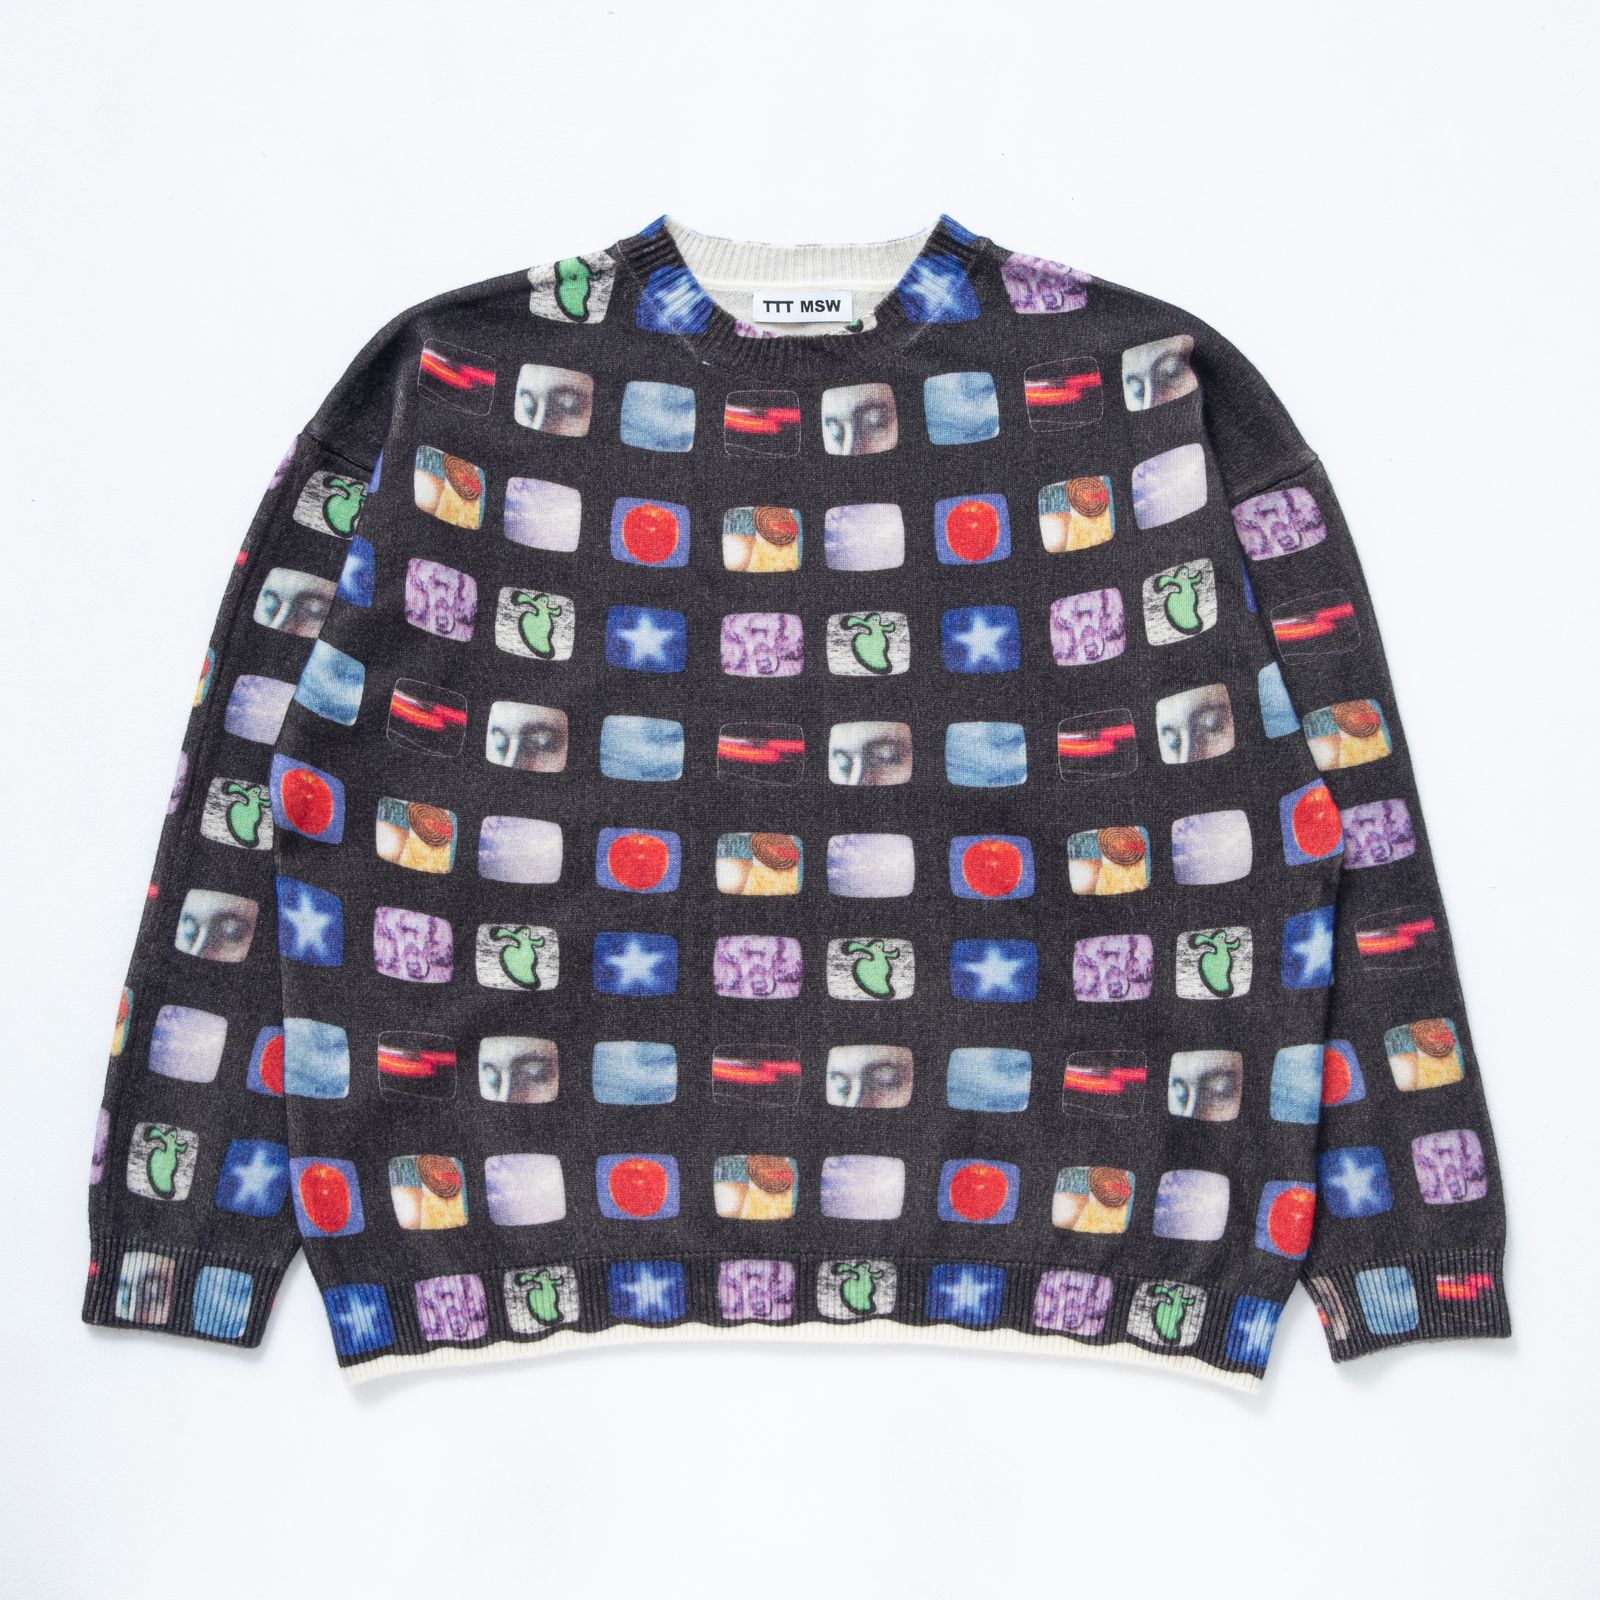 TTT MSW - 【残り一点】Television Pull Over Knit | ACRMTSM ONLINE STORE